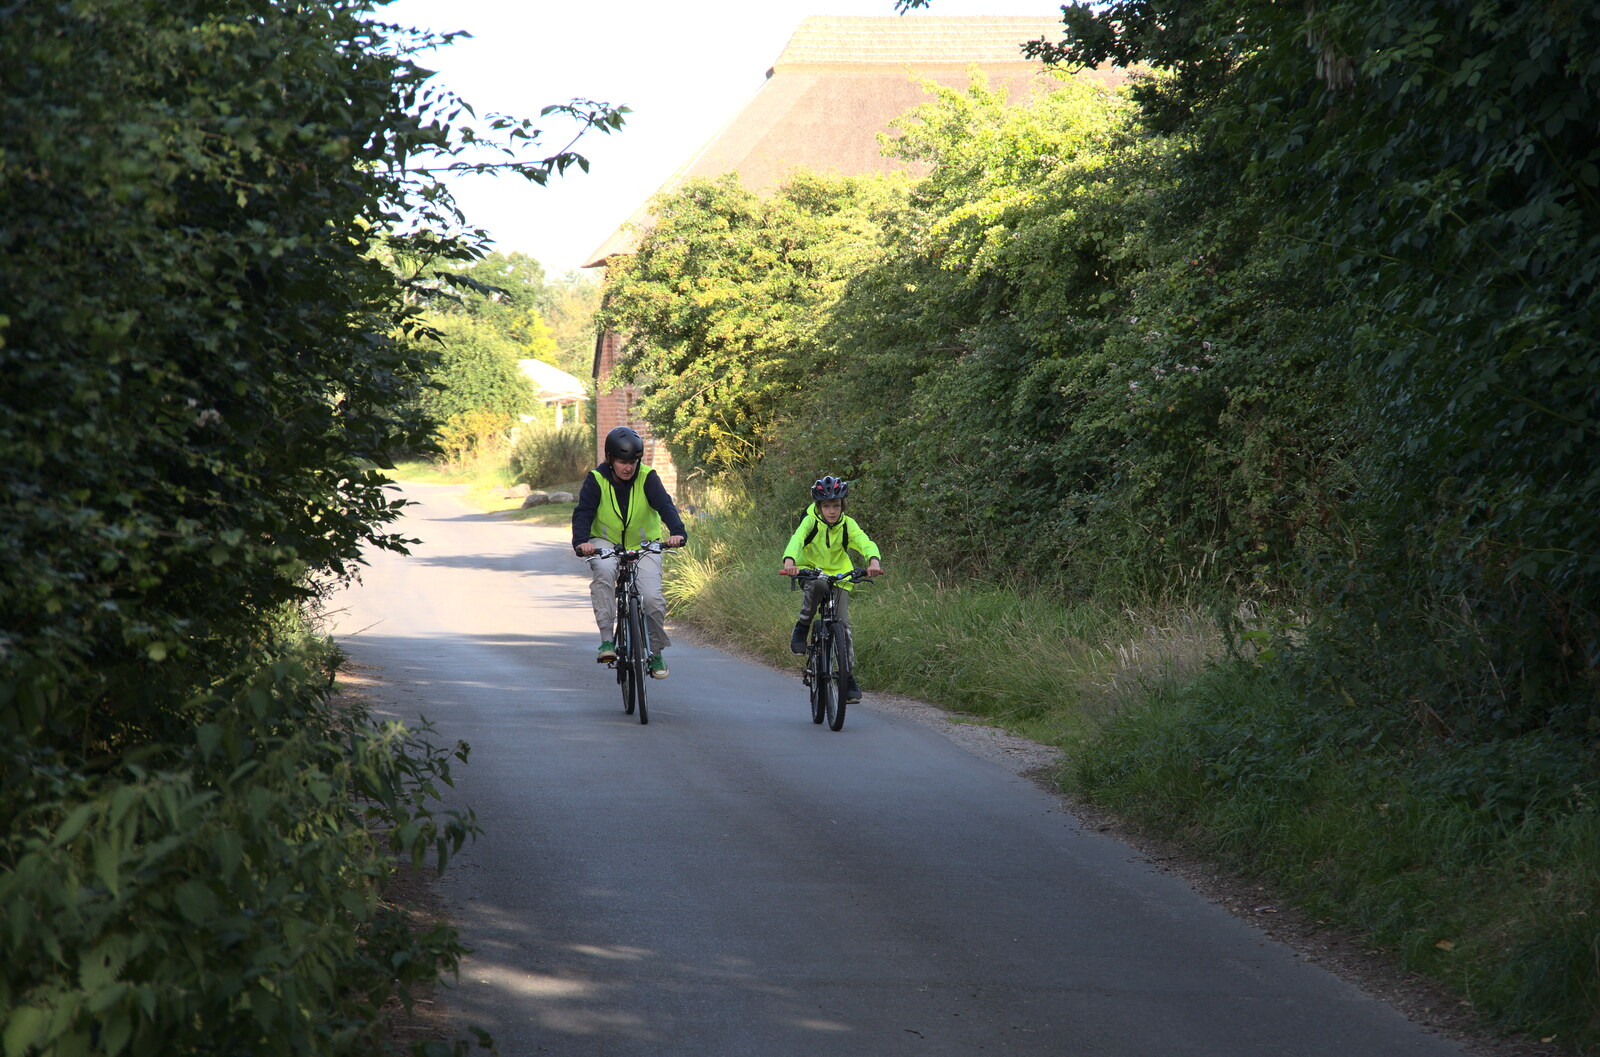 Isobel and Harry cycle down the lane from the pub from Camping in the Dunes, Waxham Sands, Norfolk - 9th July 2022